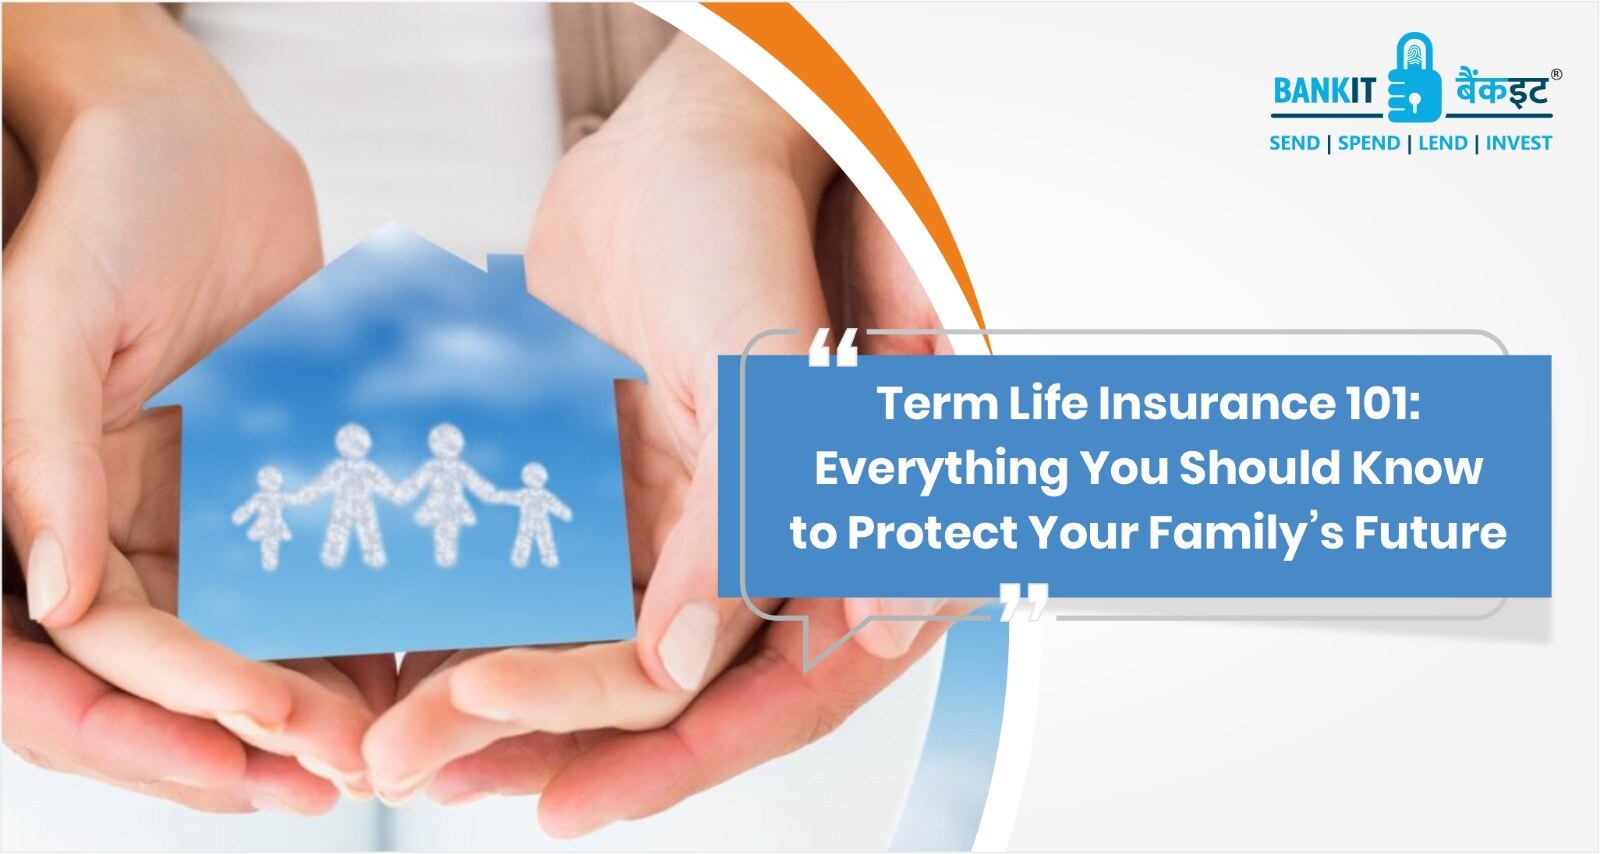 Features of Term Life Insurance  * Affordability * Age of Entry * Policy Term * Maturity Benefits * Life Cover * Tax Benefits